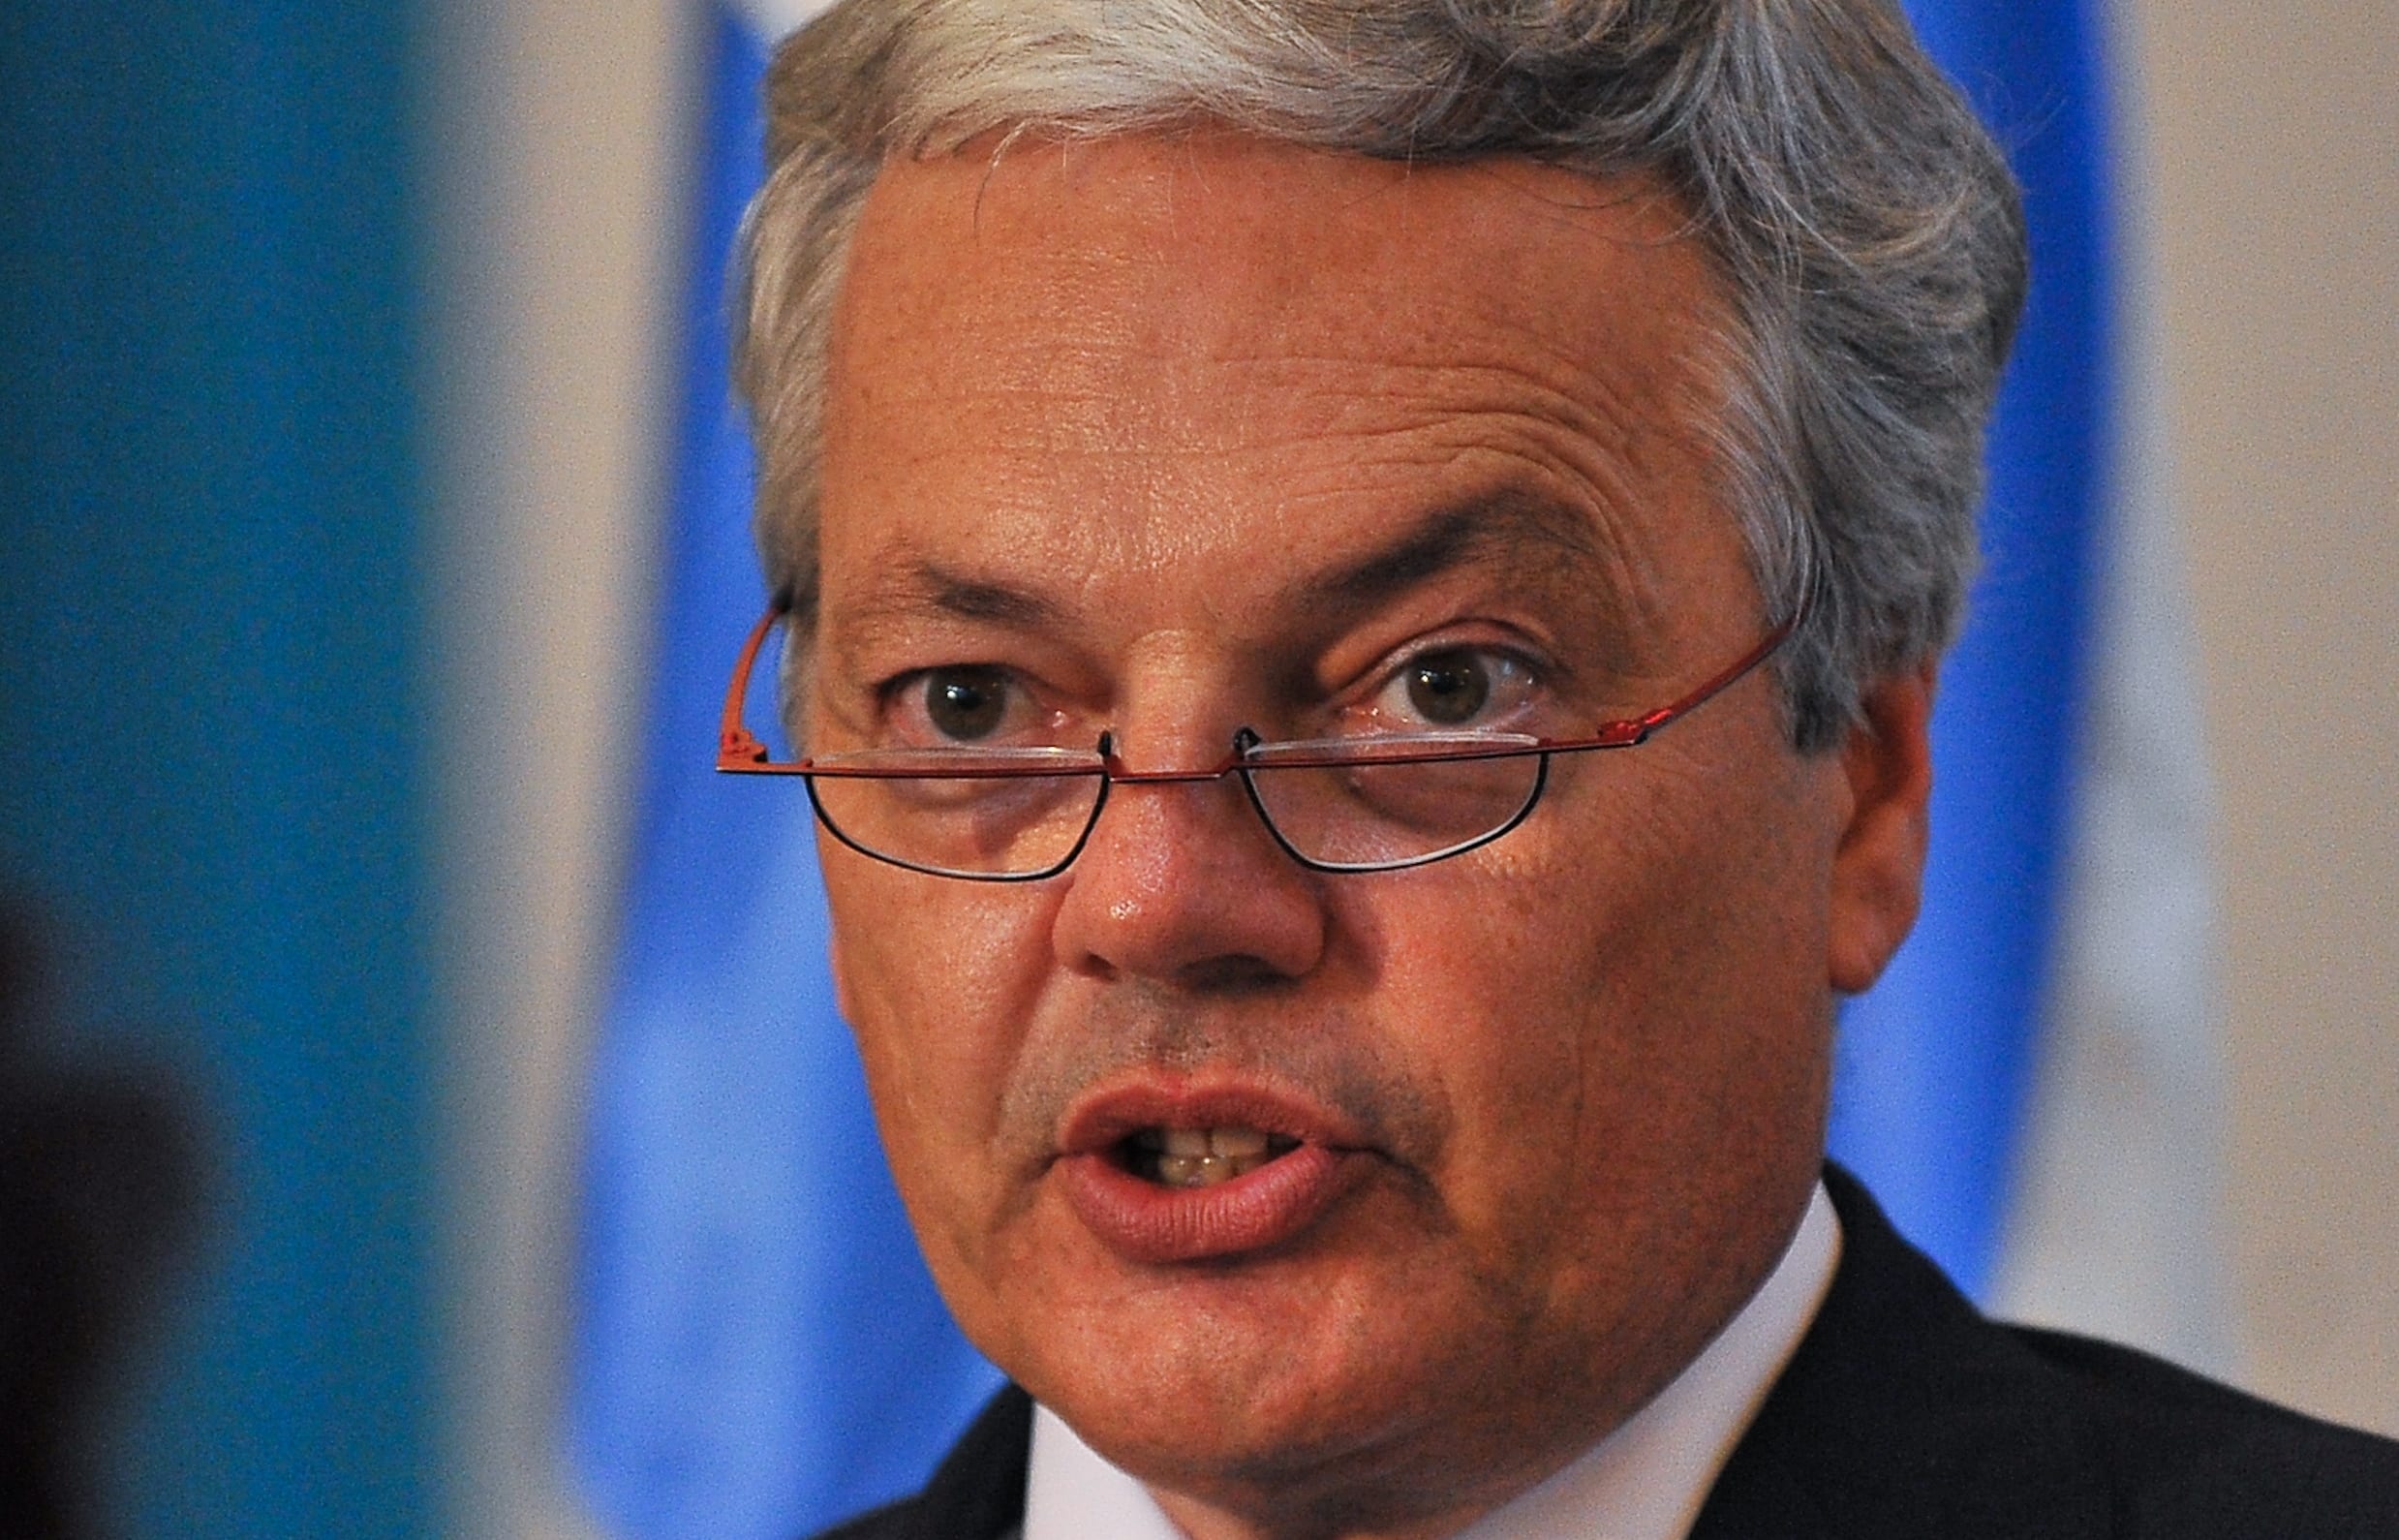 Belgium's Deputy Prime Minister and Minister of Foreign Affairs and European Affairs Didier Reynders.